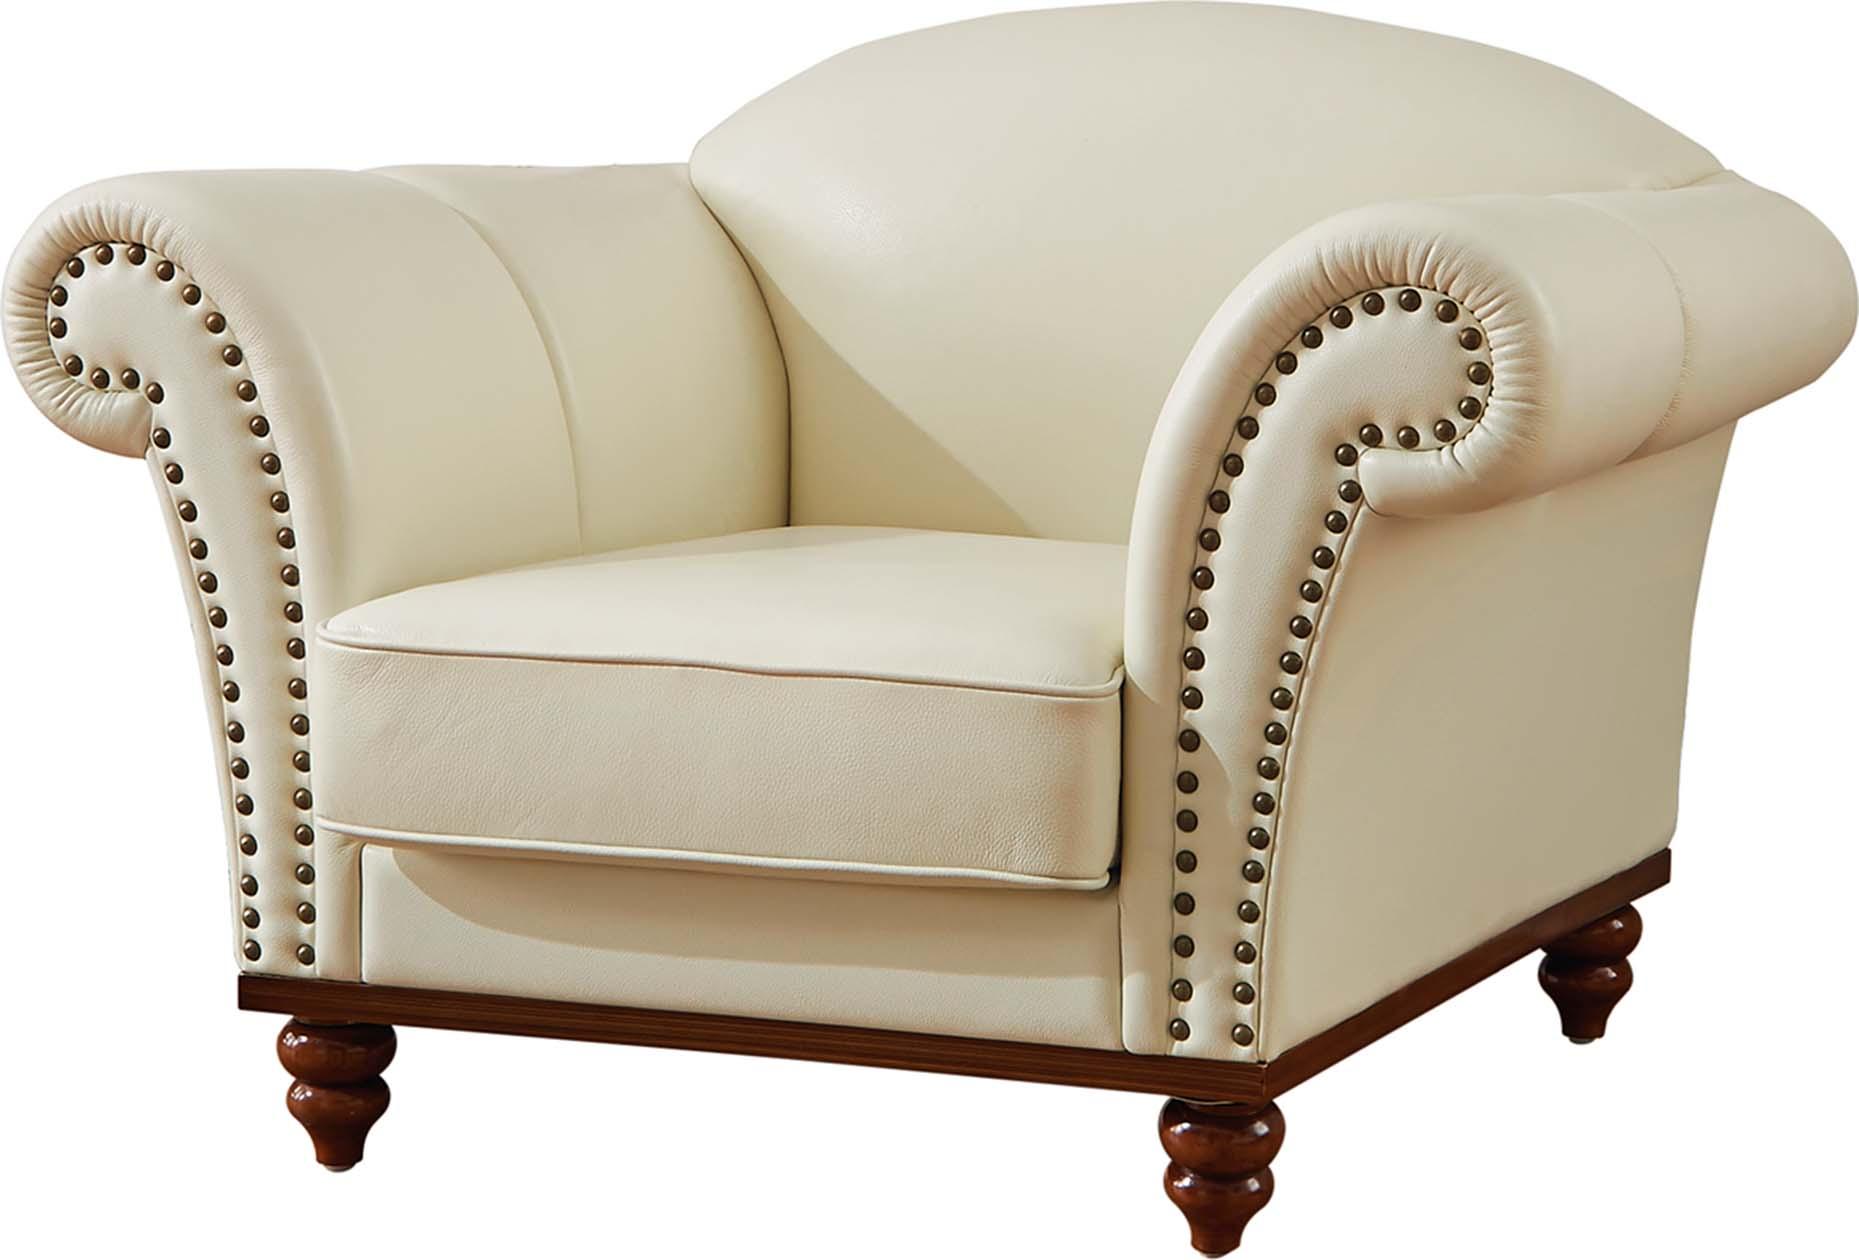 

    
ESF 2601 Ivory-Sofa Set-3 ESF Sofa Loveseat and Chair Set
